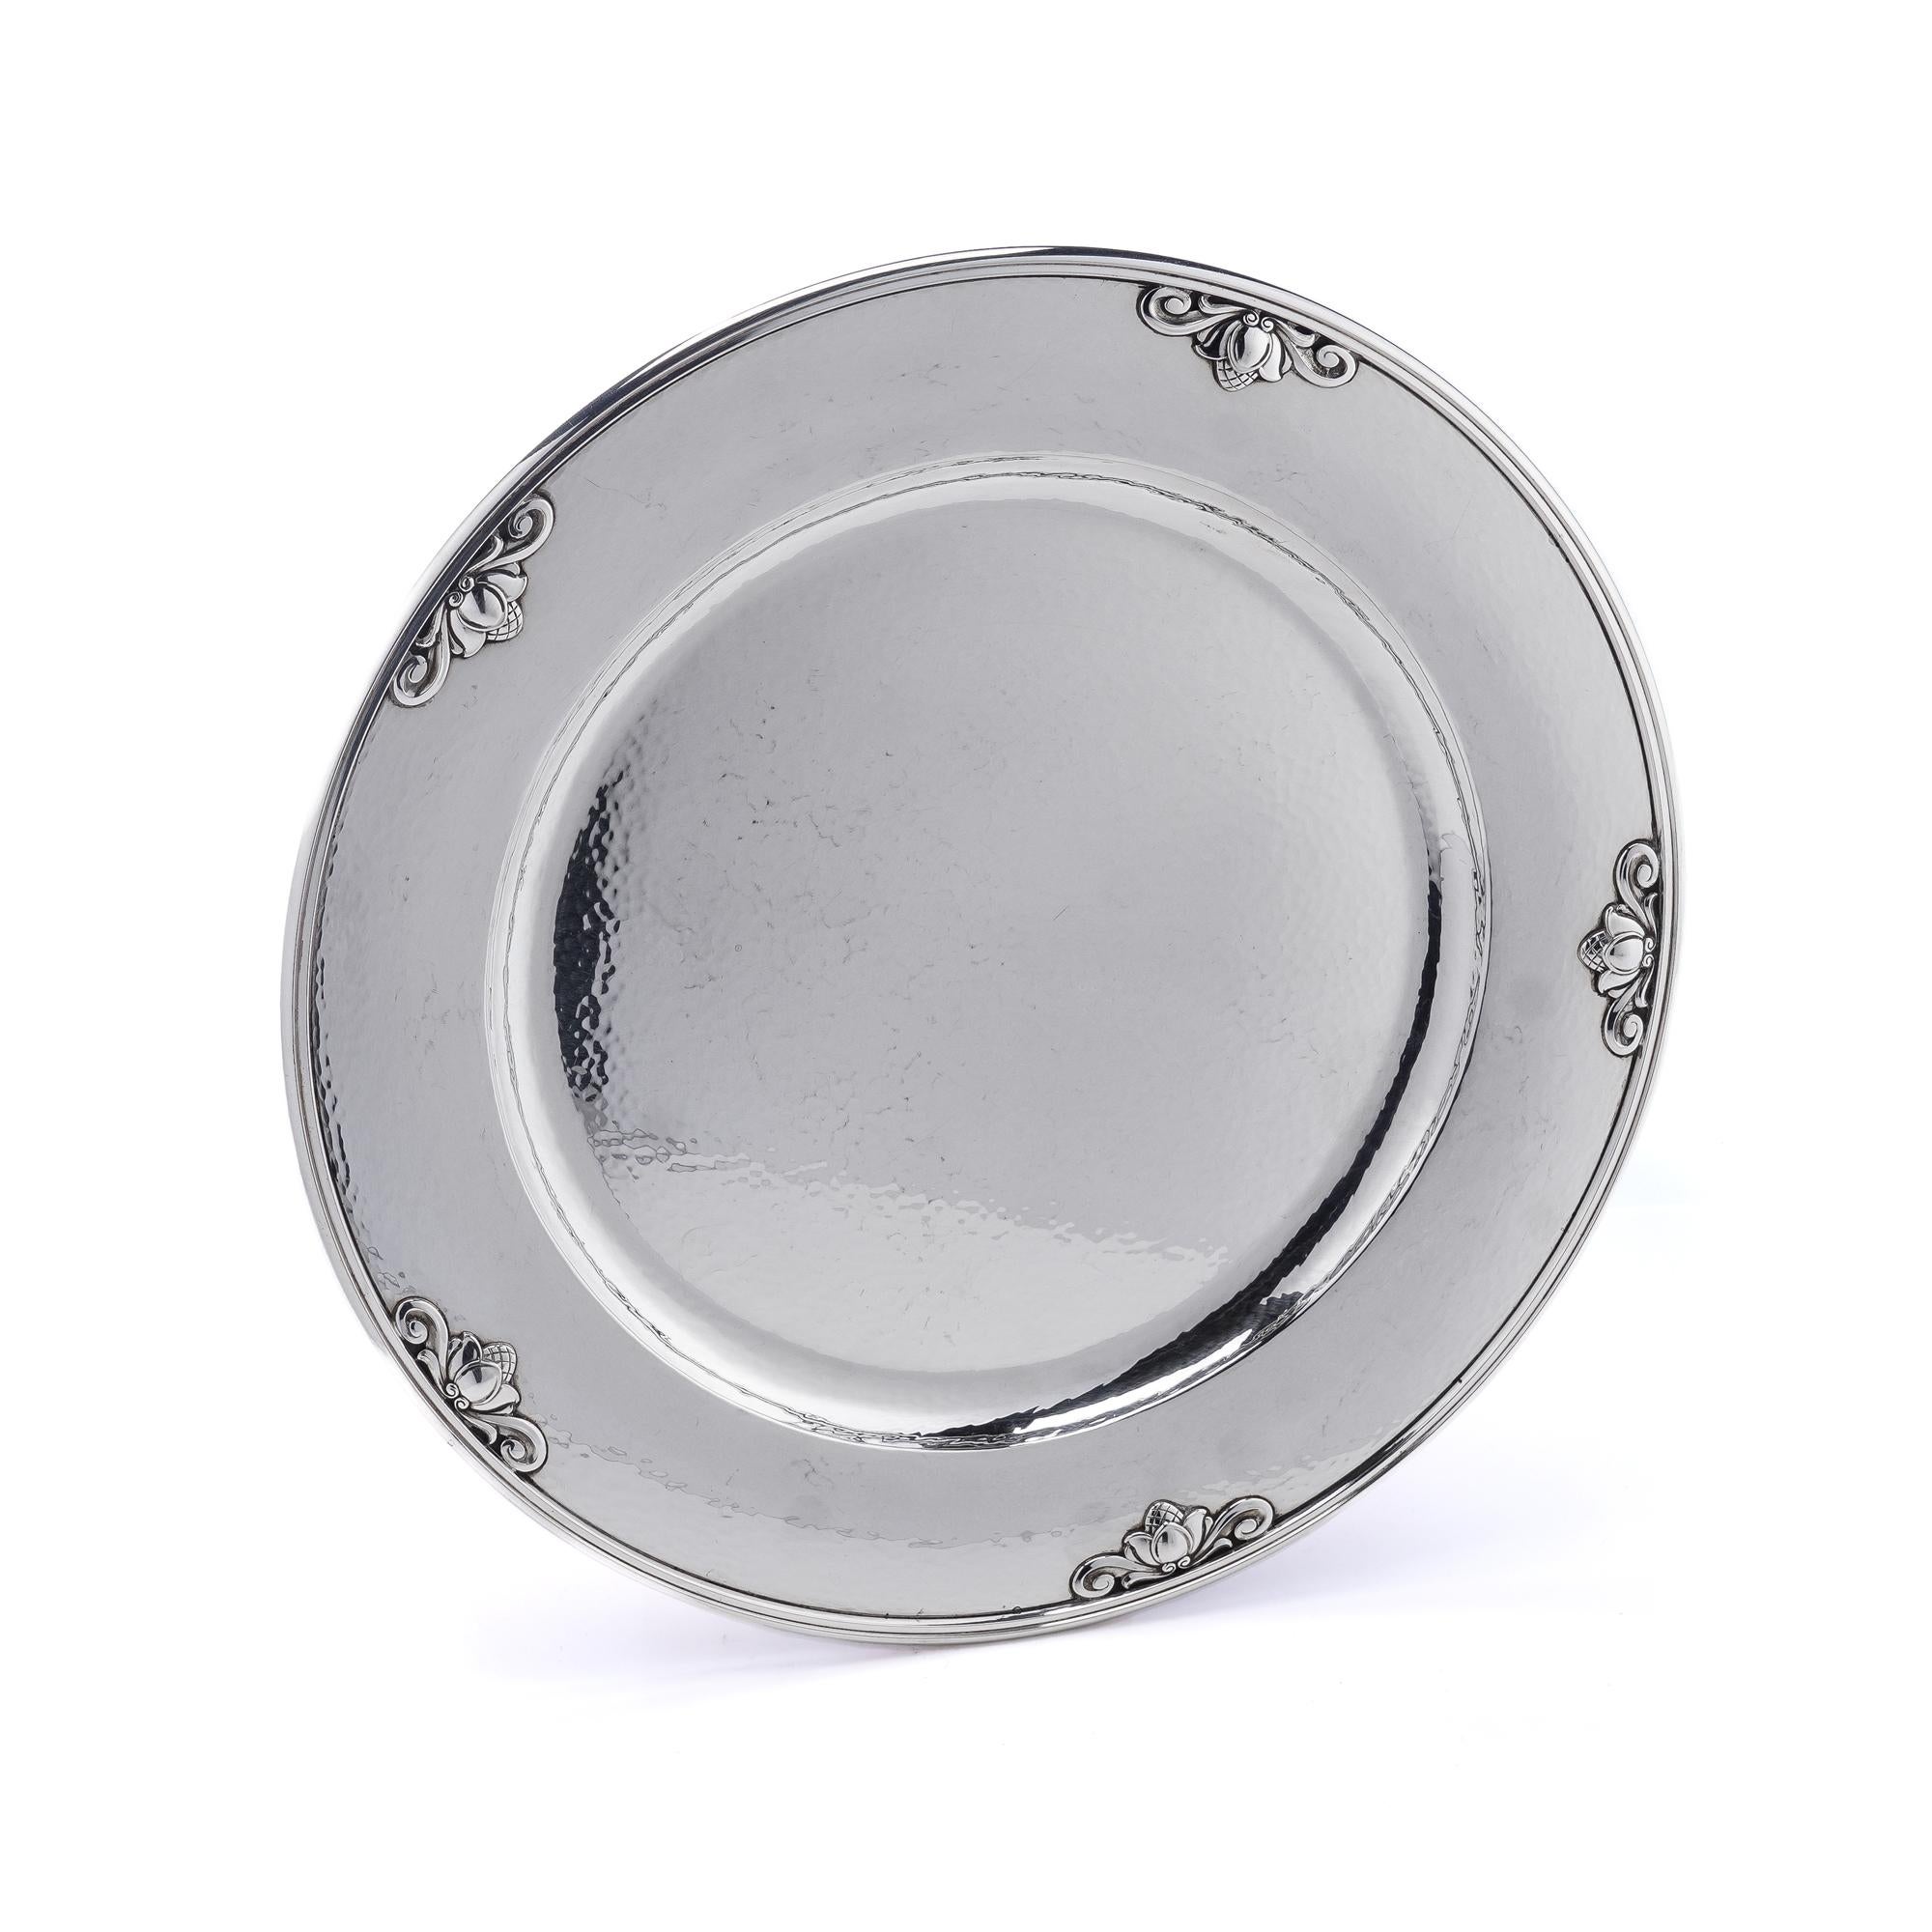 The Georg Jensen vintage sterling silver bread plate with Acorn pattern, designed by Johan Rohde, is a piece of Danish silverware that was produced by the renowned Georg Jensen silver company. The bread plate features a classic design that includes